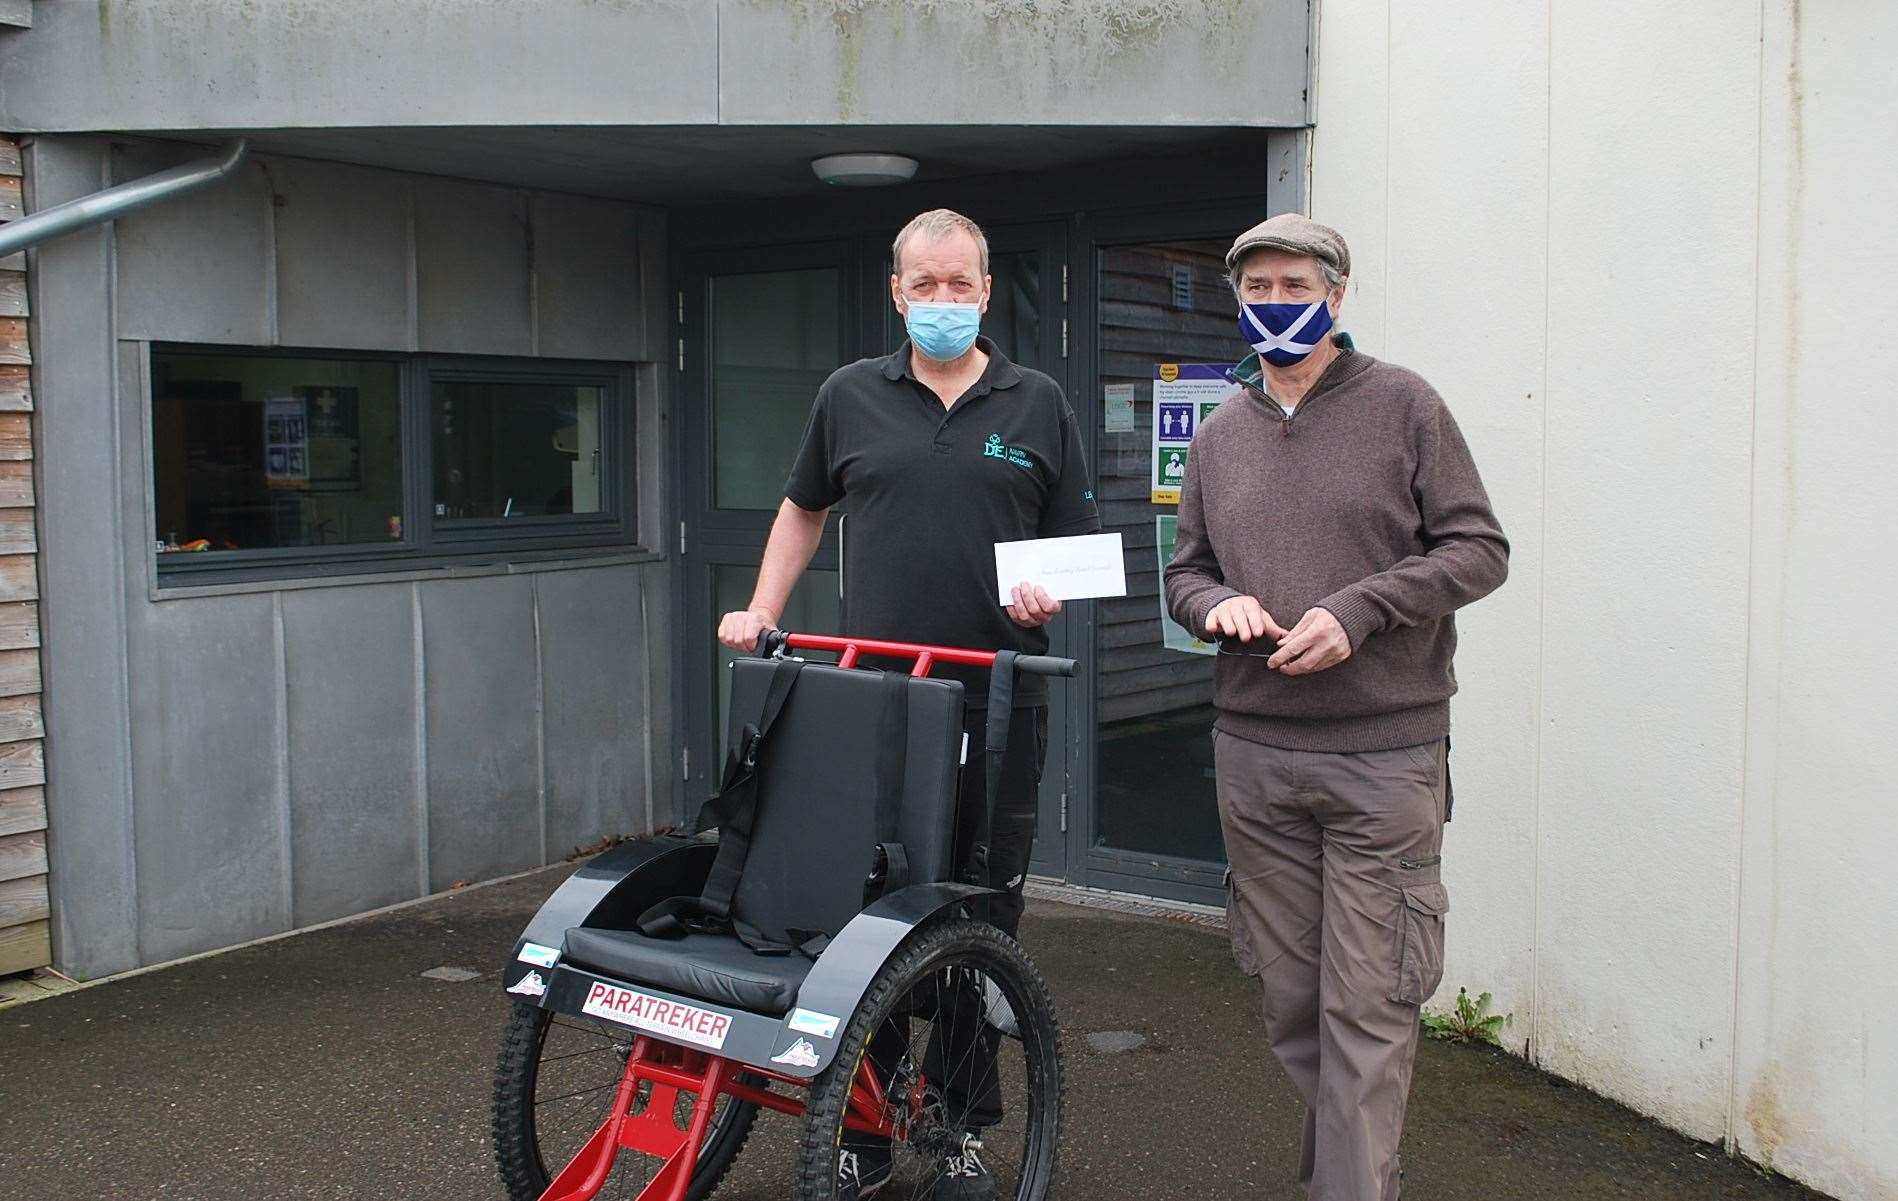 Duncan Sanderson and Hamish Bain with Nairn Academy’s new Paratreker wheelchair.